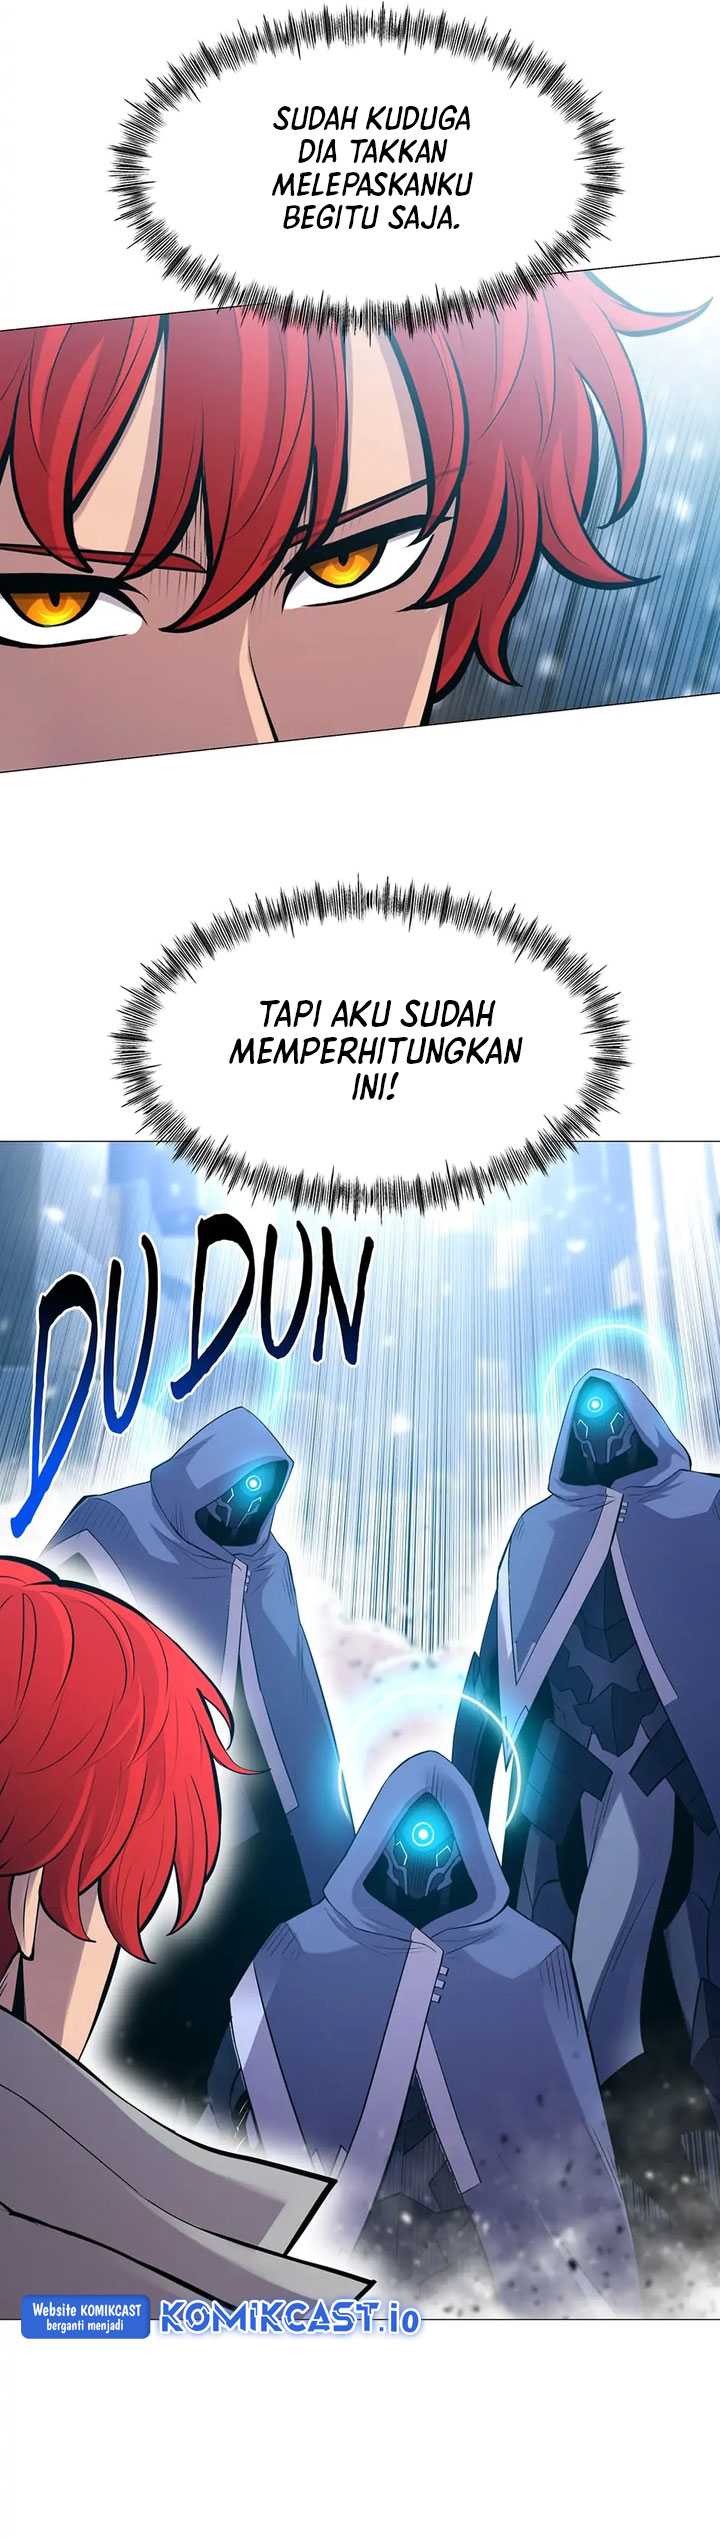 Updater Chapter 106